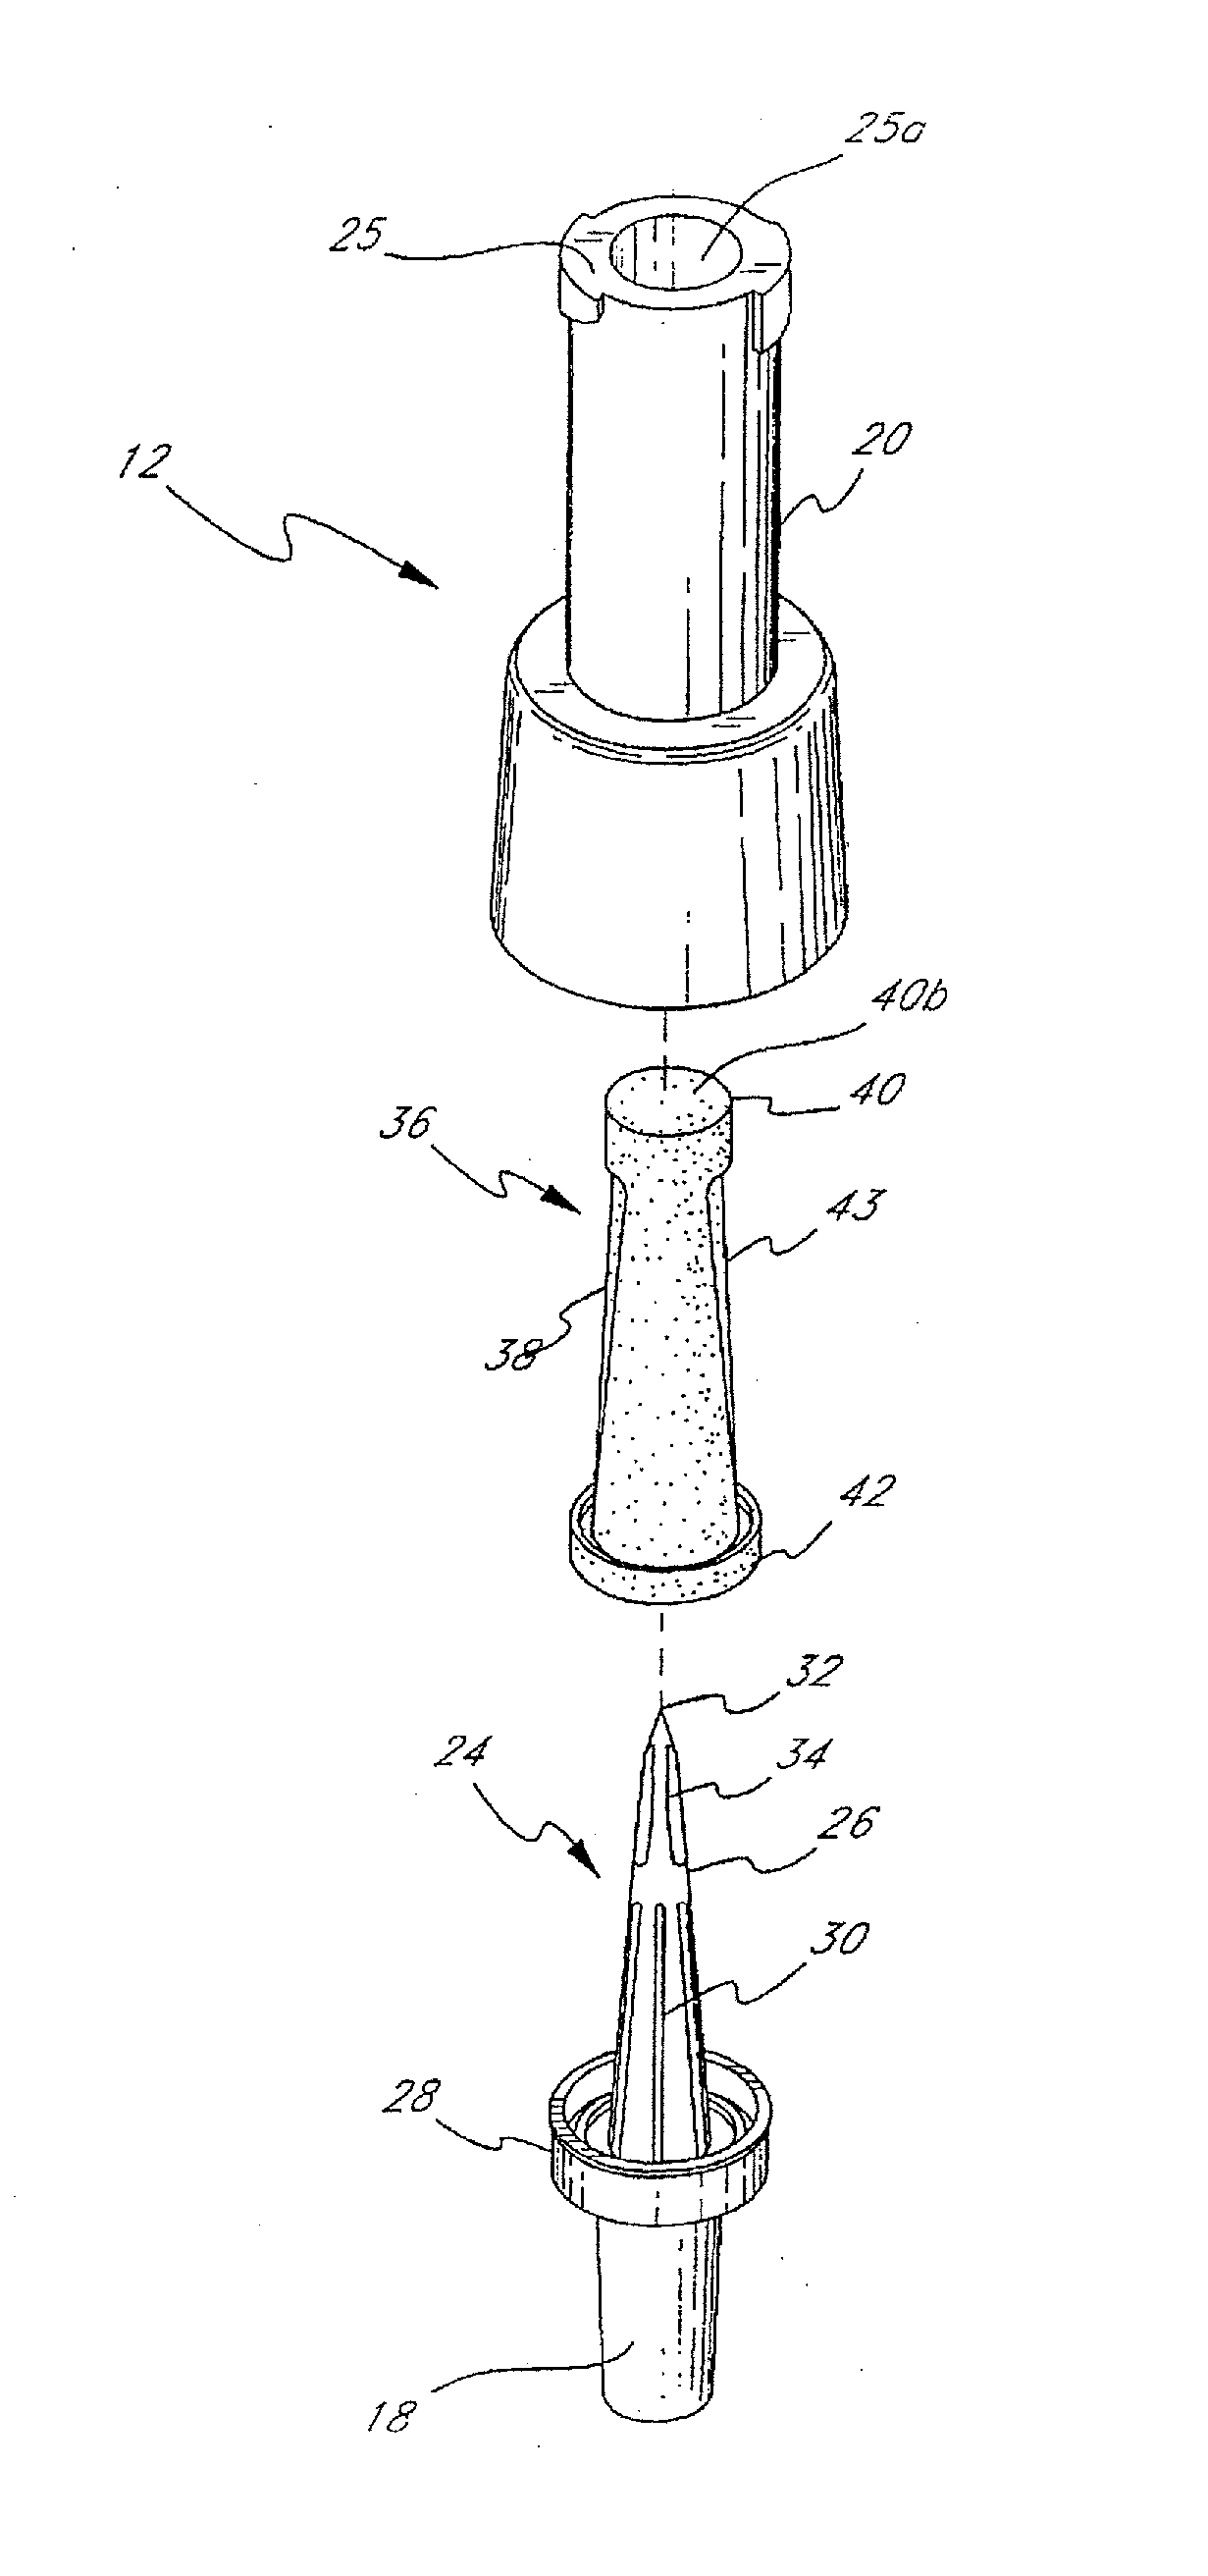 Intravenous connector having antimicrobial treatment